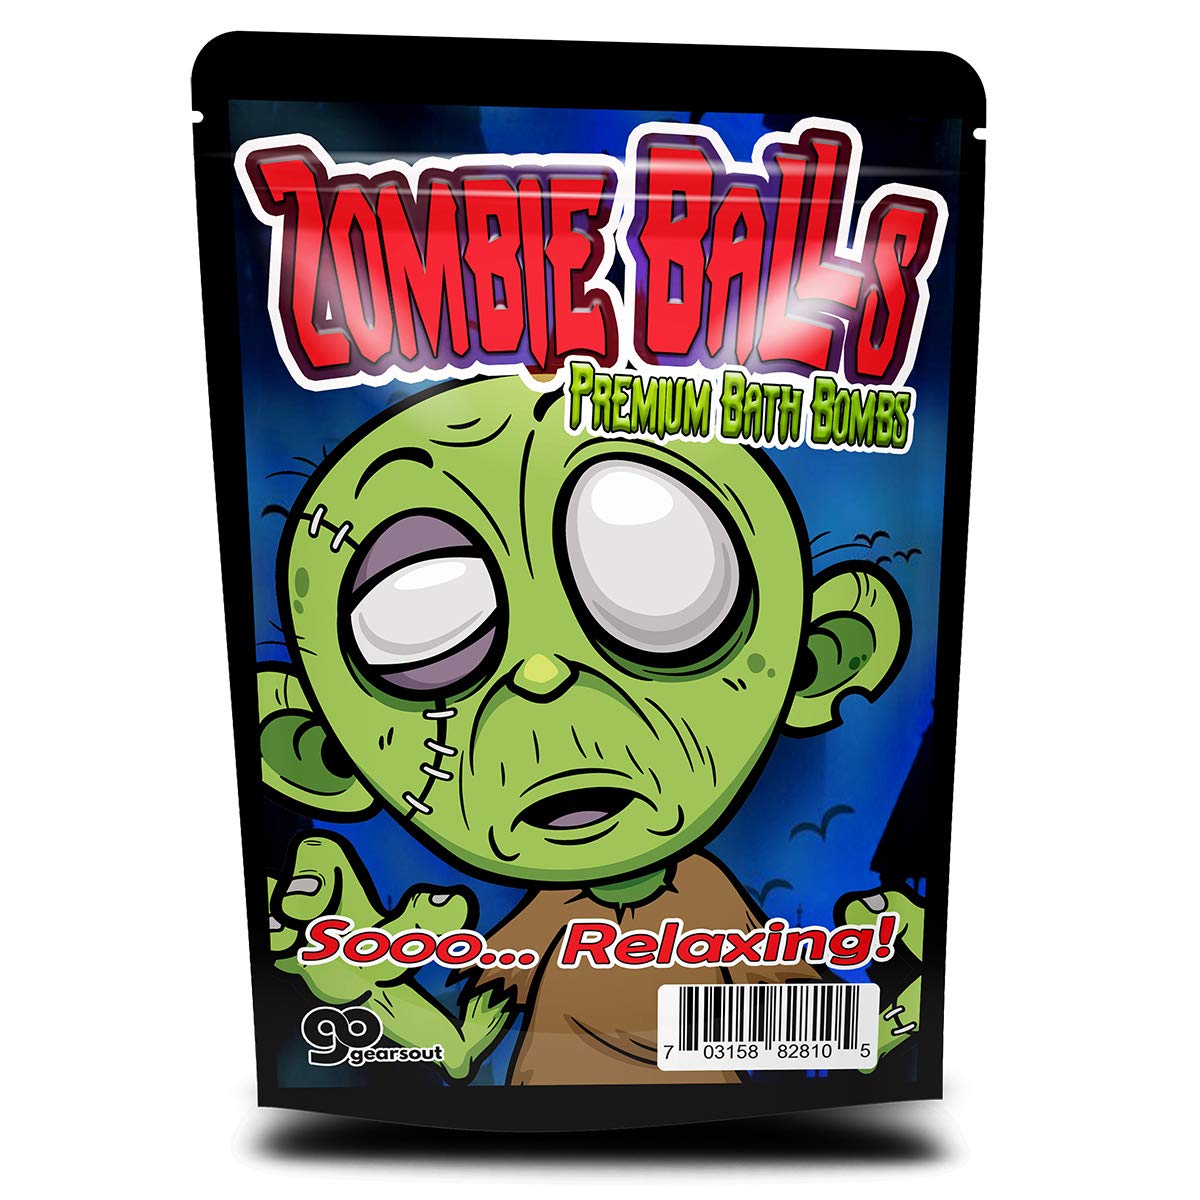 Zombie Balls Bath Bombs - Fun Zombie Design - Cool Bath Bombs for Teens - Cute XL Bath Fizzers, Green and Black, Handcrafted in The USA